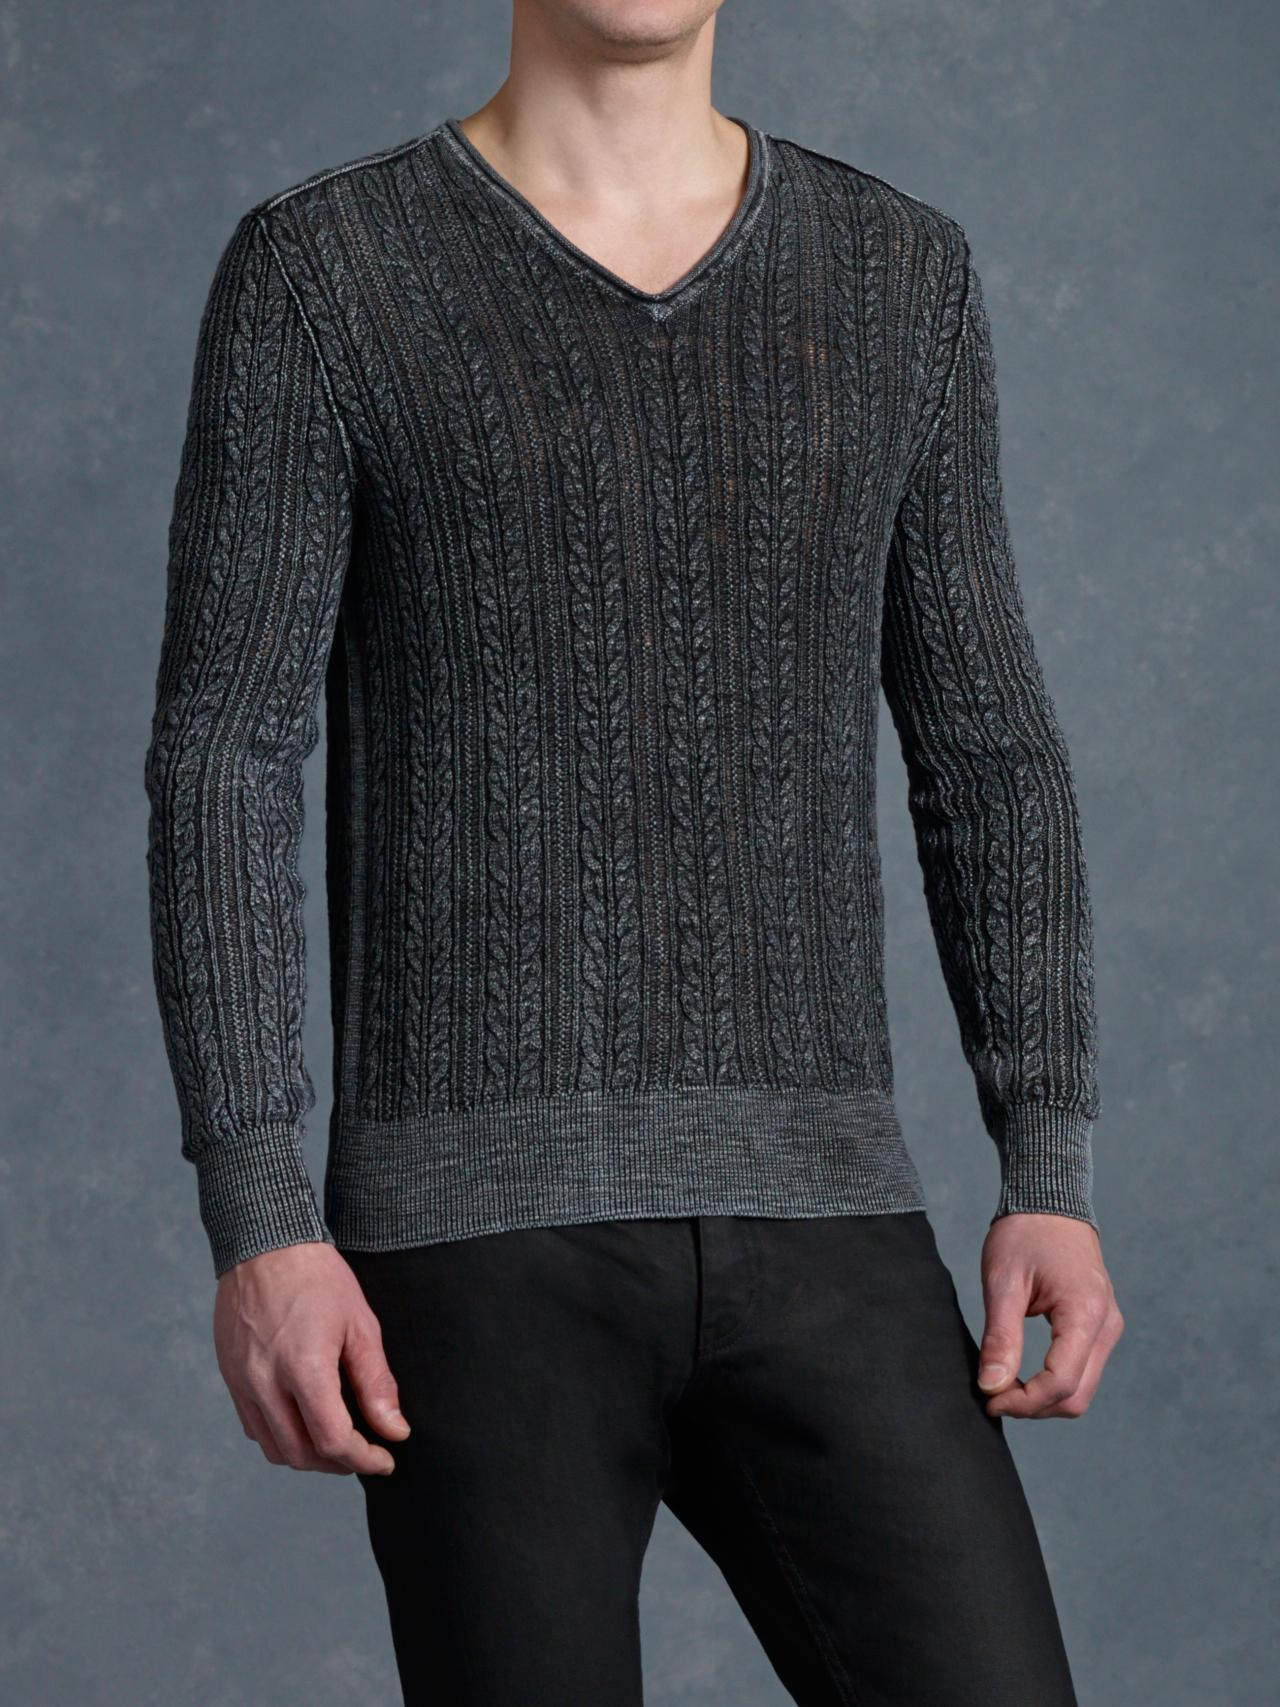 Lyst - John Varvatos V-Neck Cable Knit Sweater in Gray for Men